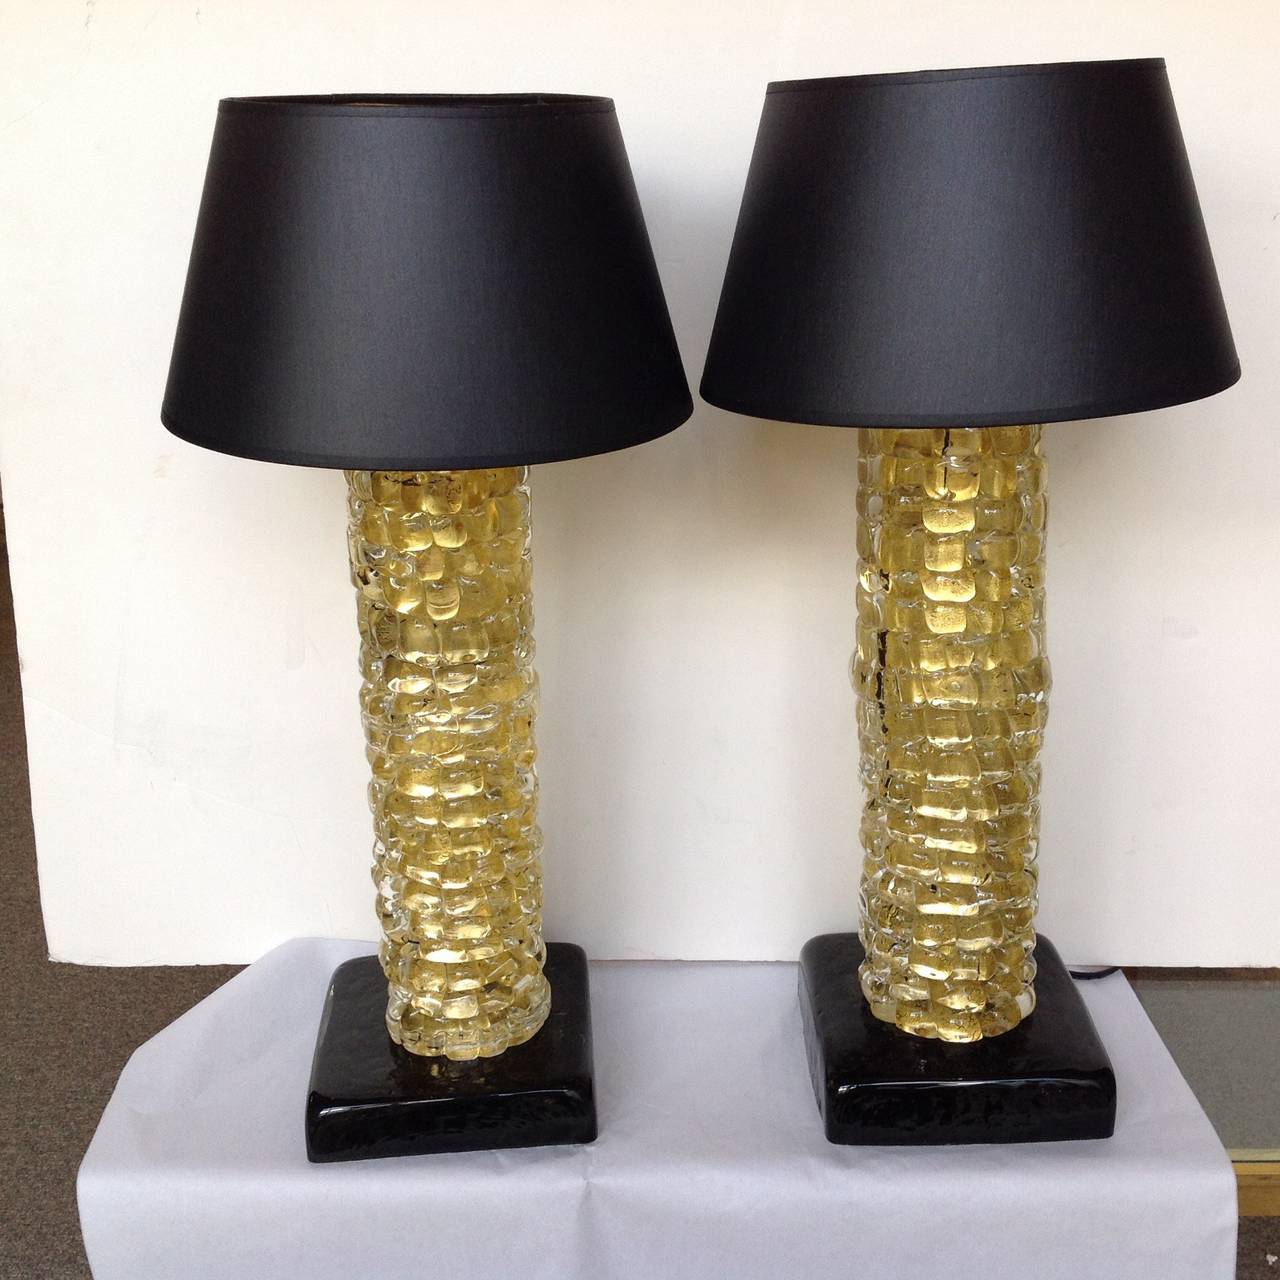 Pair of table lamps by Seguso with gold leaf encased in handmade glass on a connecting black glass base. Bases are 7